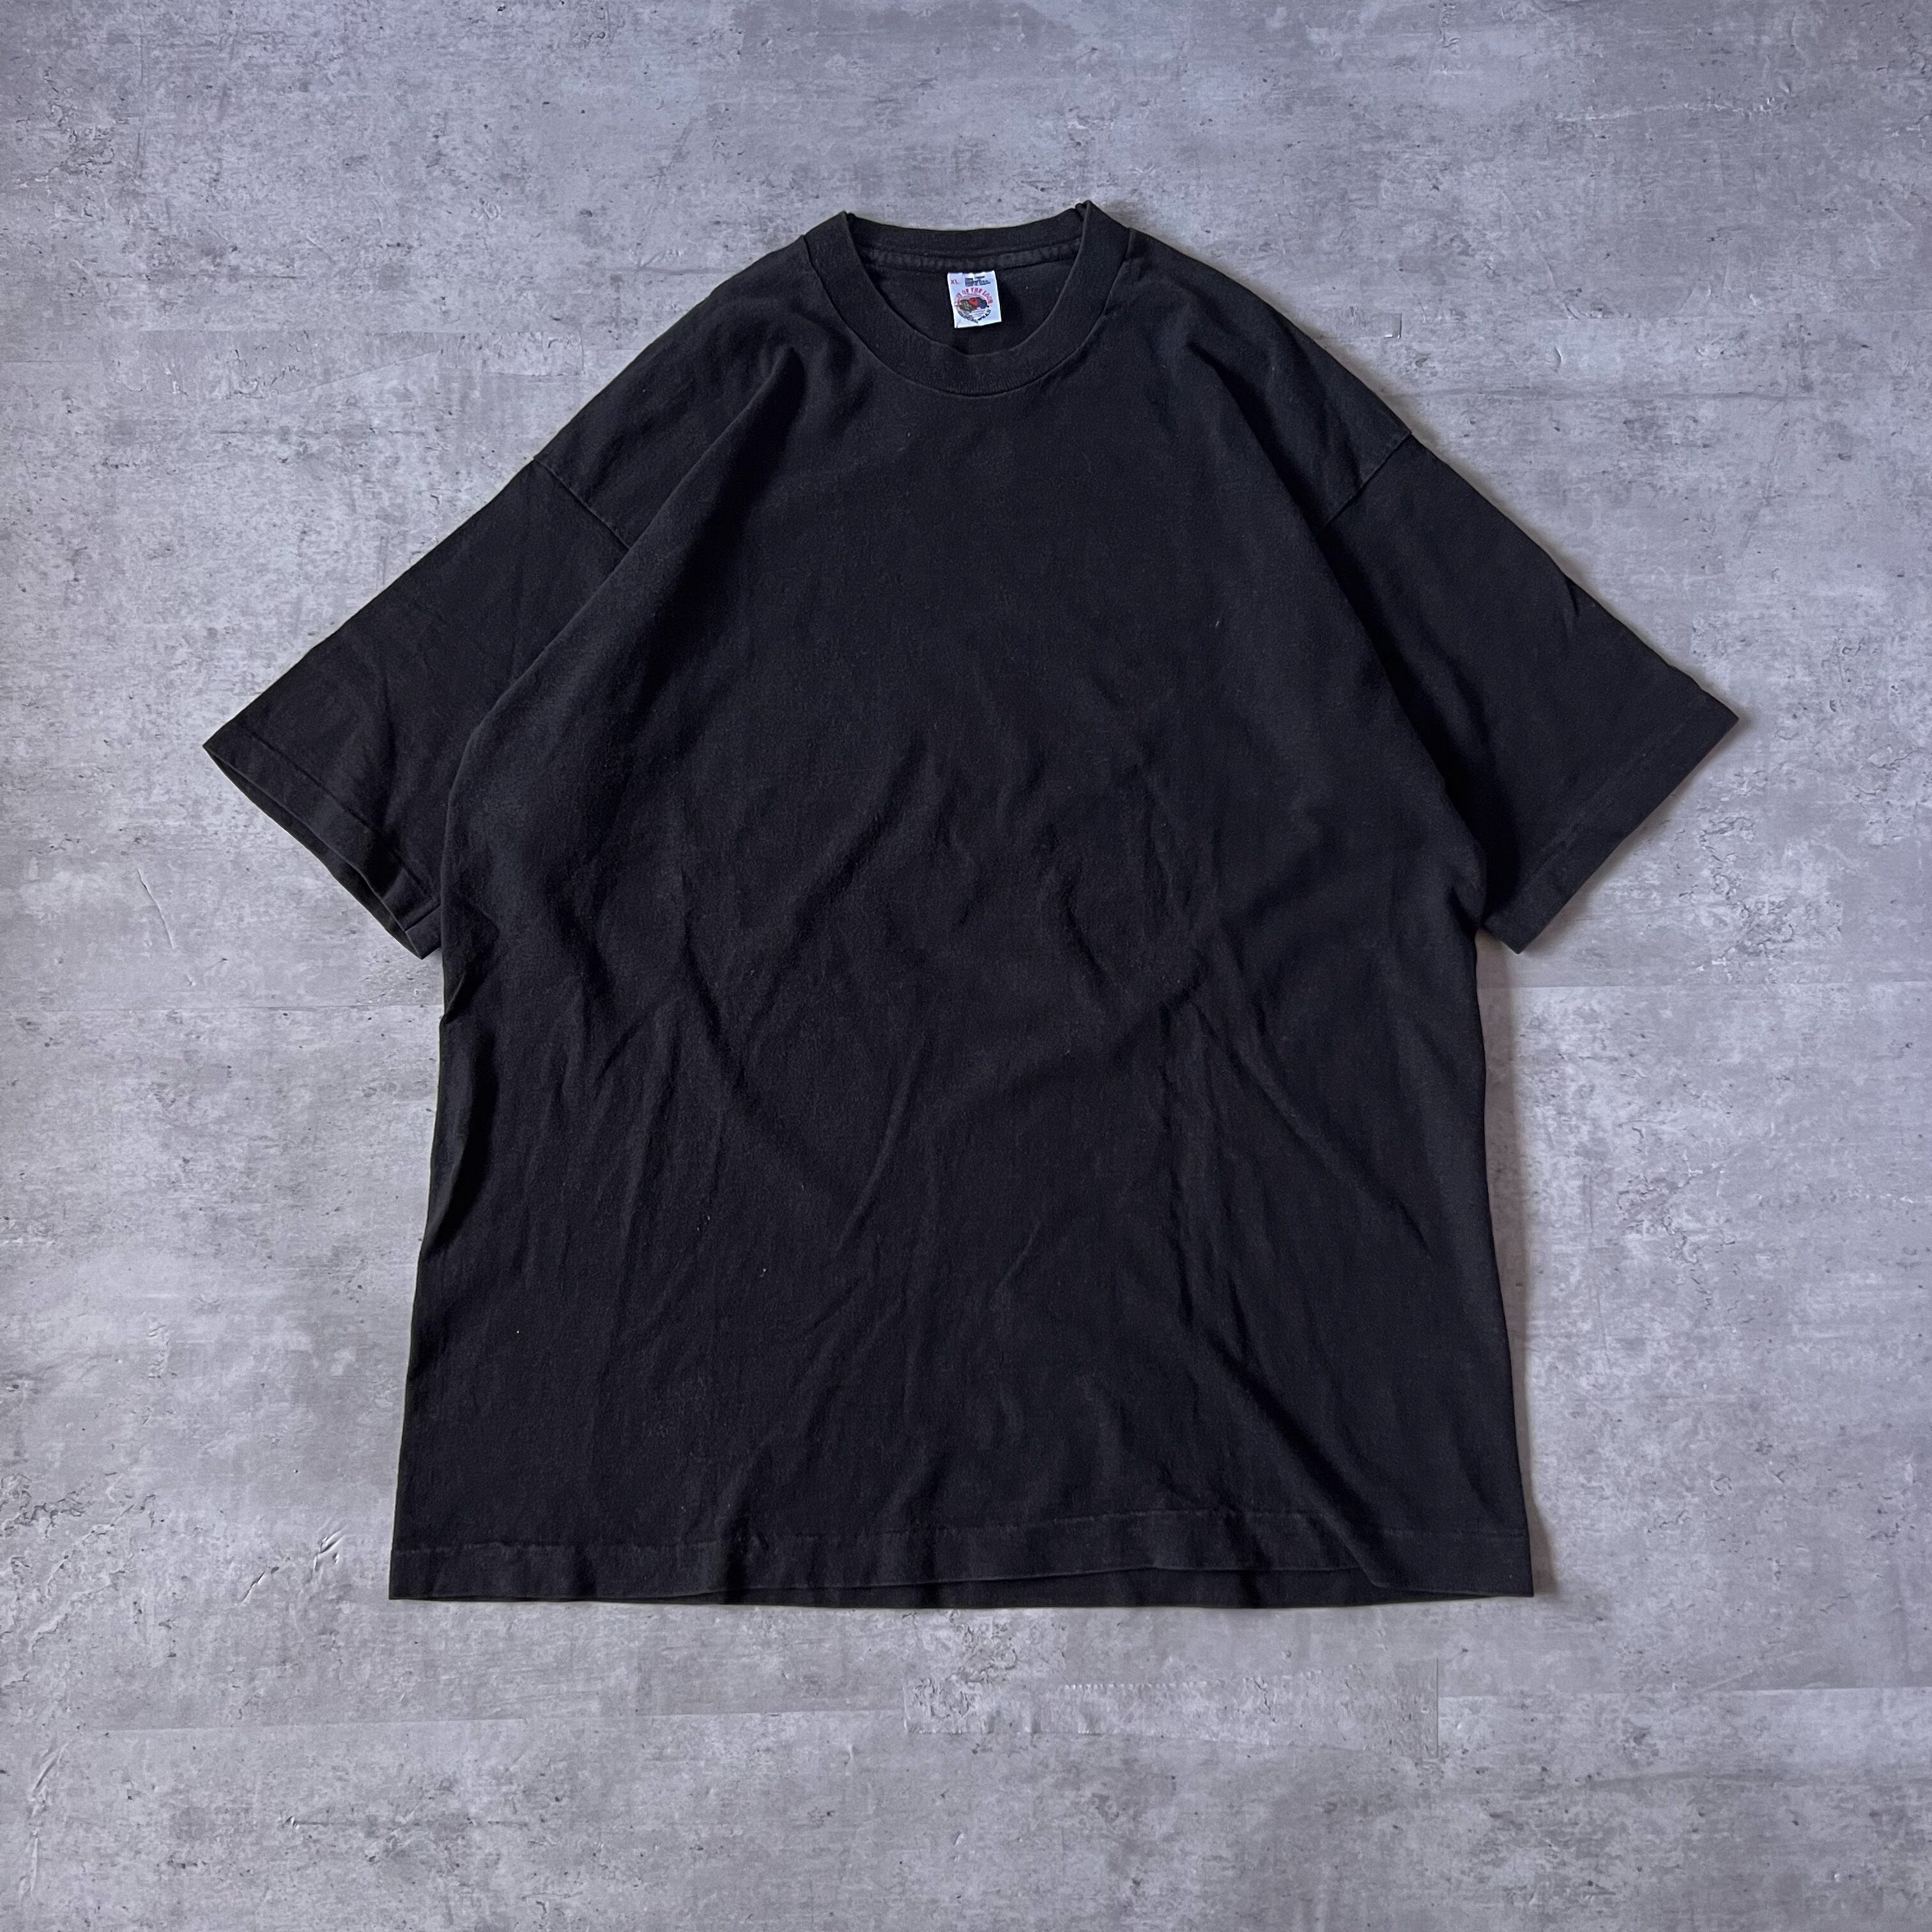 90s “FRUIT OF THE ROOM” XL size made in usa black color plain Tee